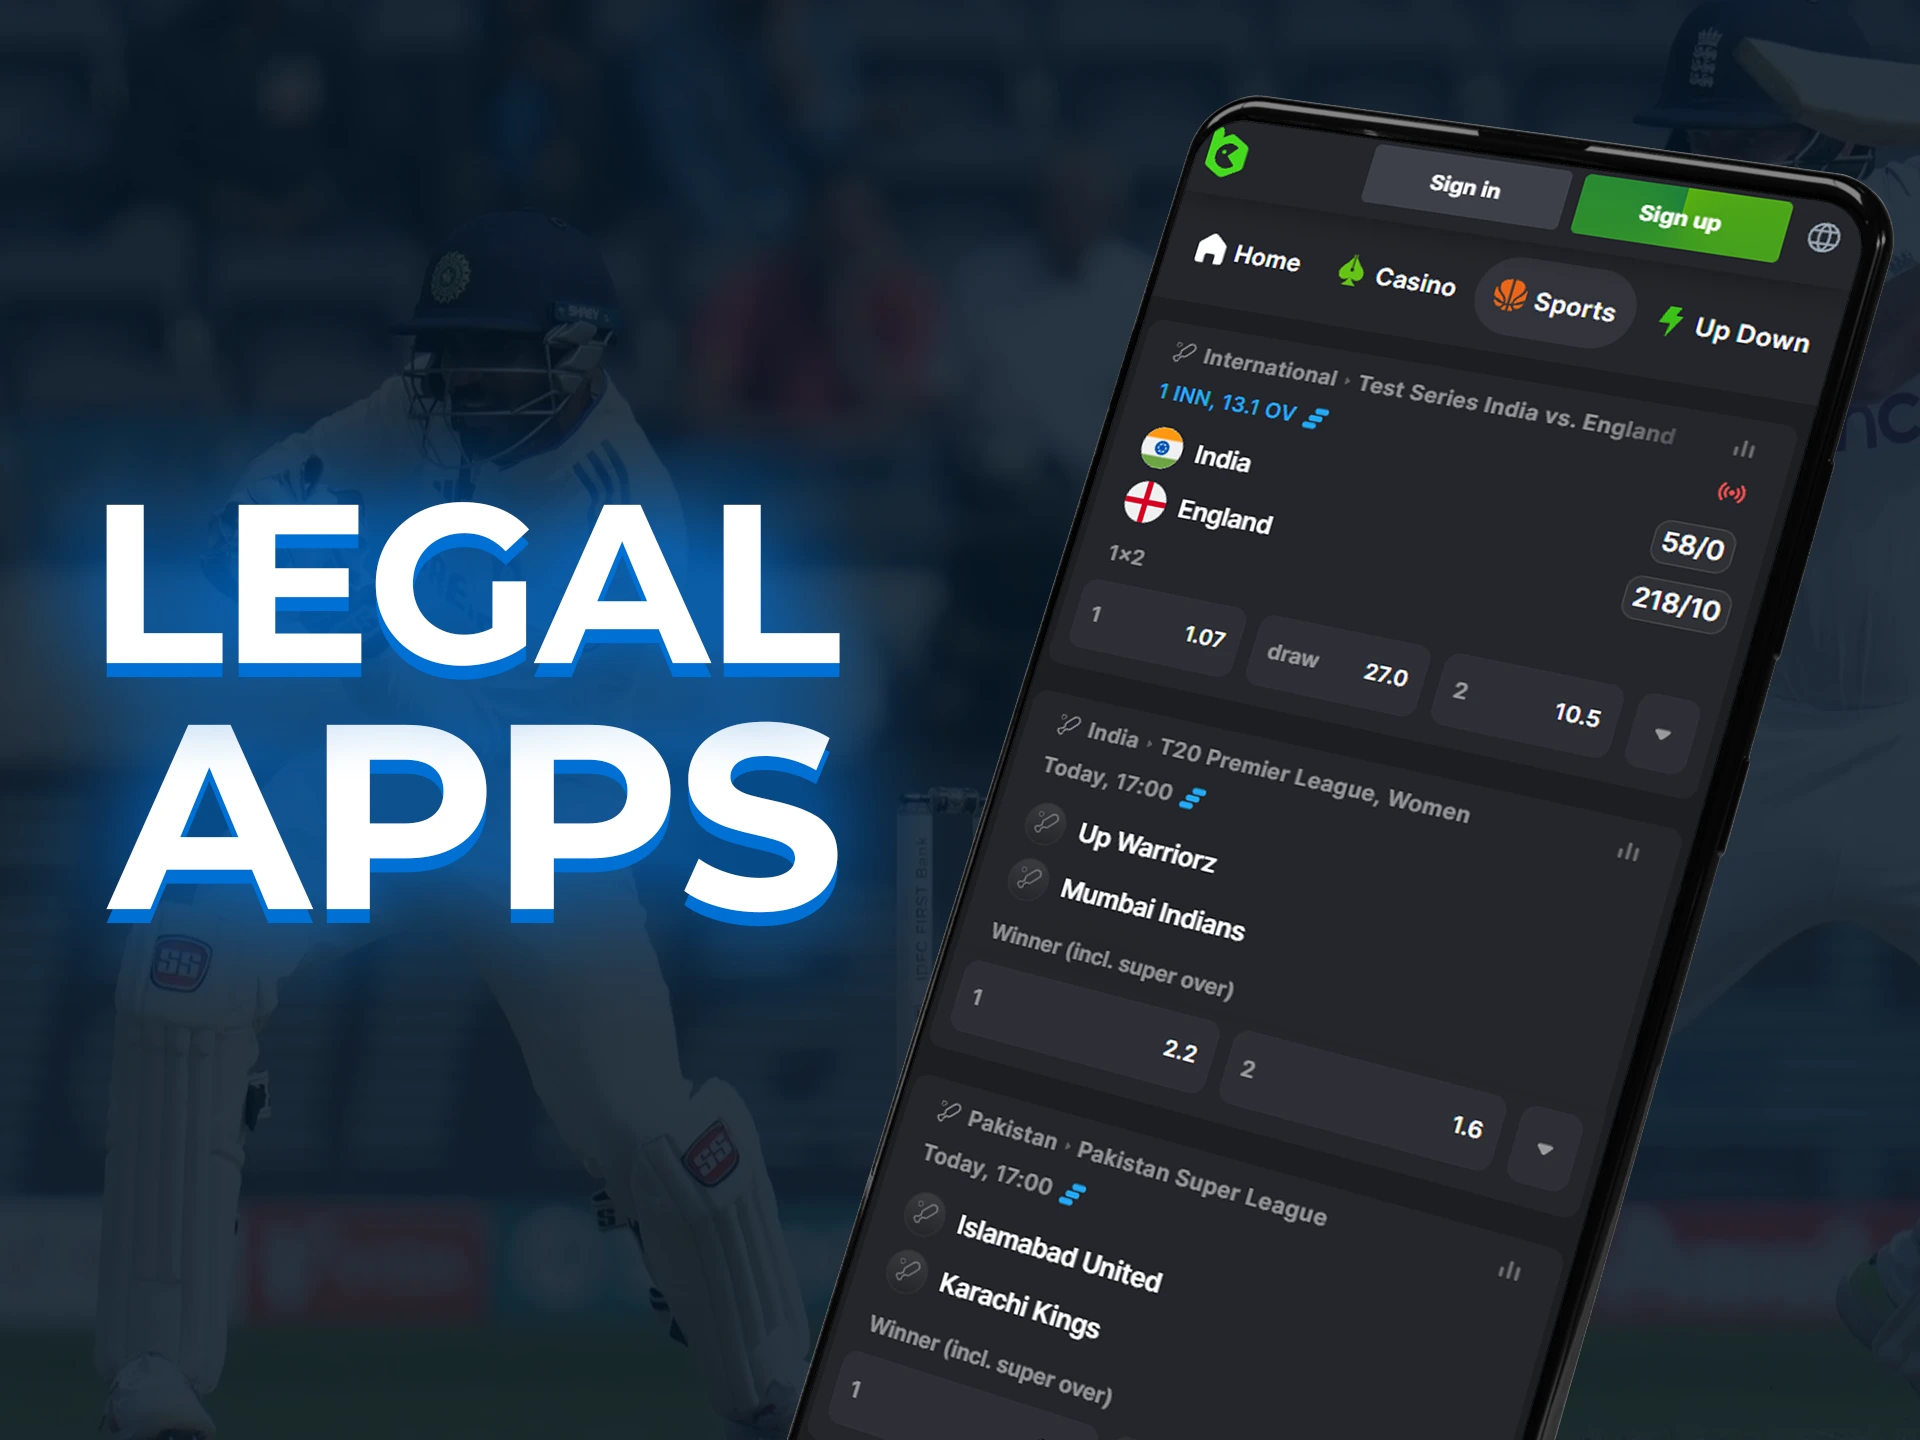 Download legal cricket betting apps in India for free.